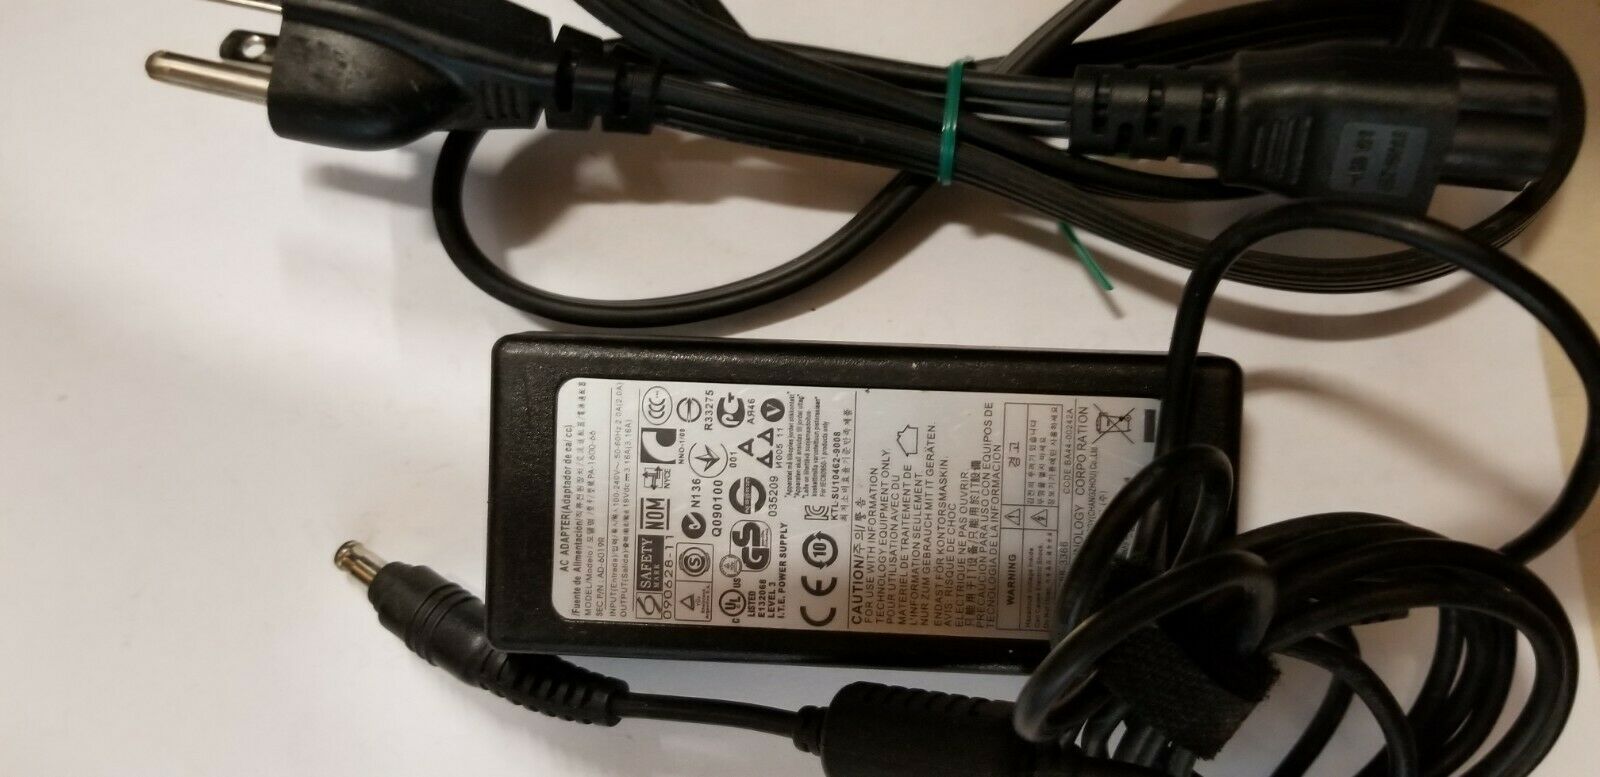 UK used laptop original and Genuine Samsung laptop charger , AC adapter charger, big mouth for sale in ikeja lagos computer village